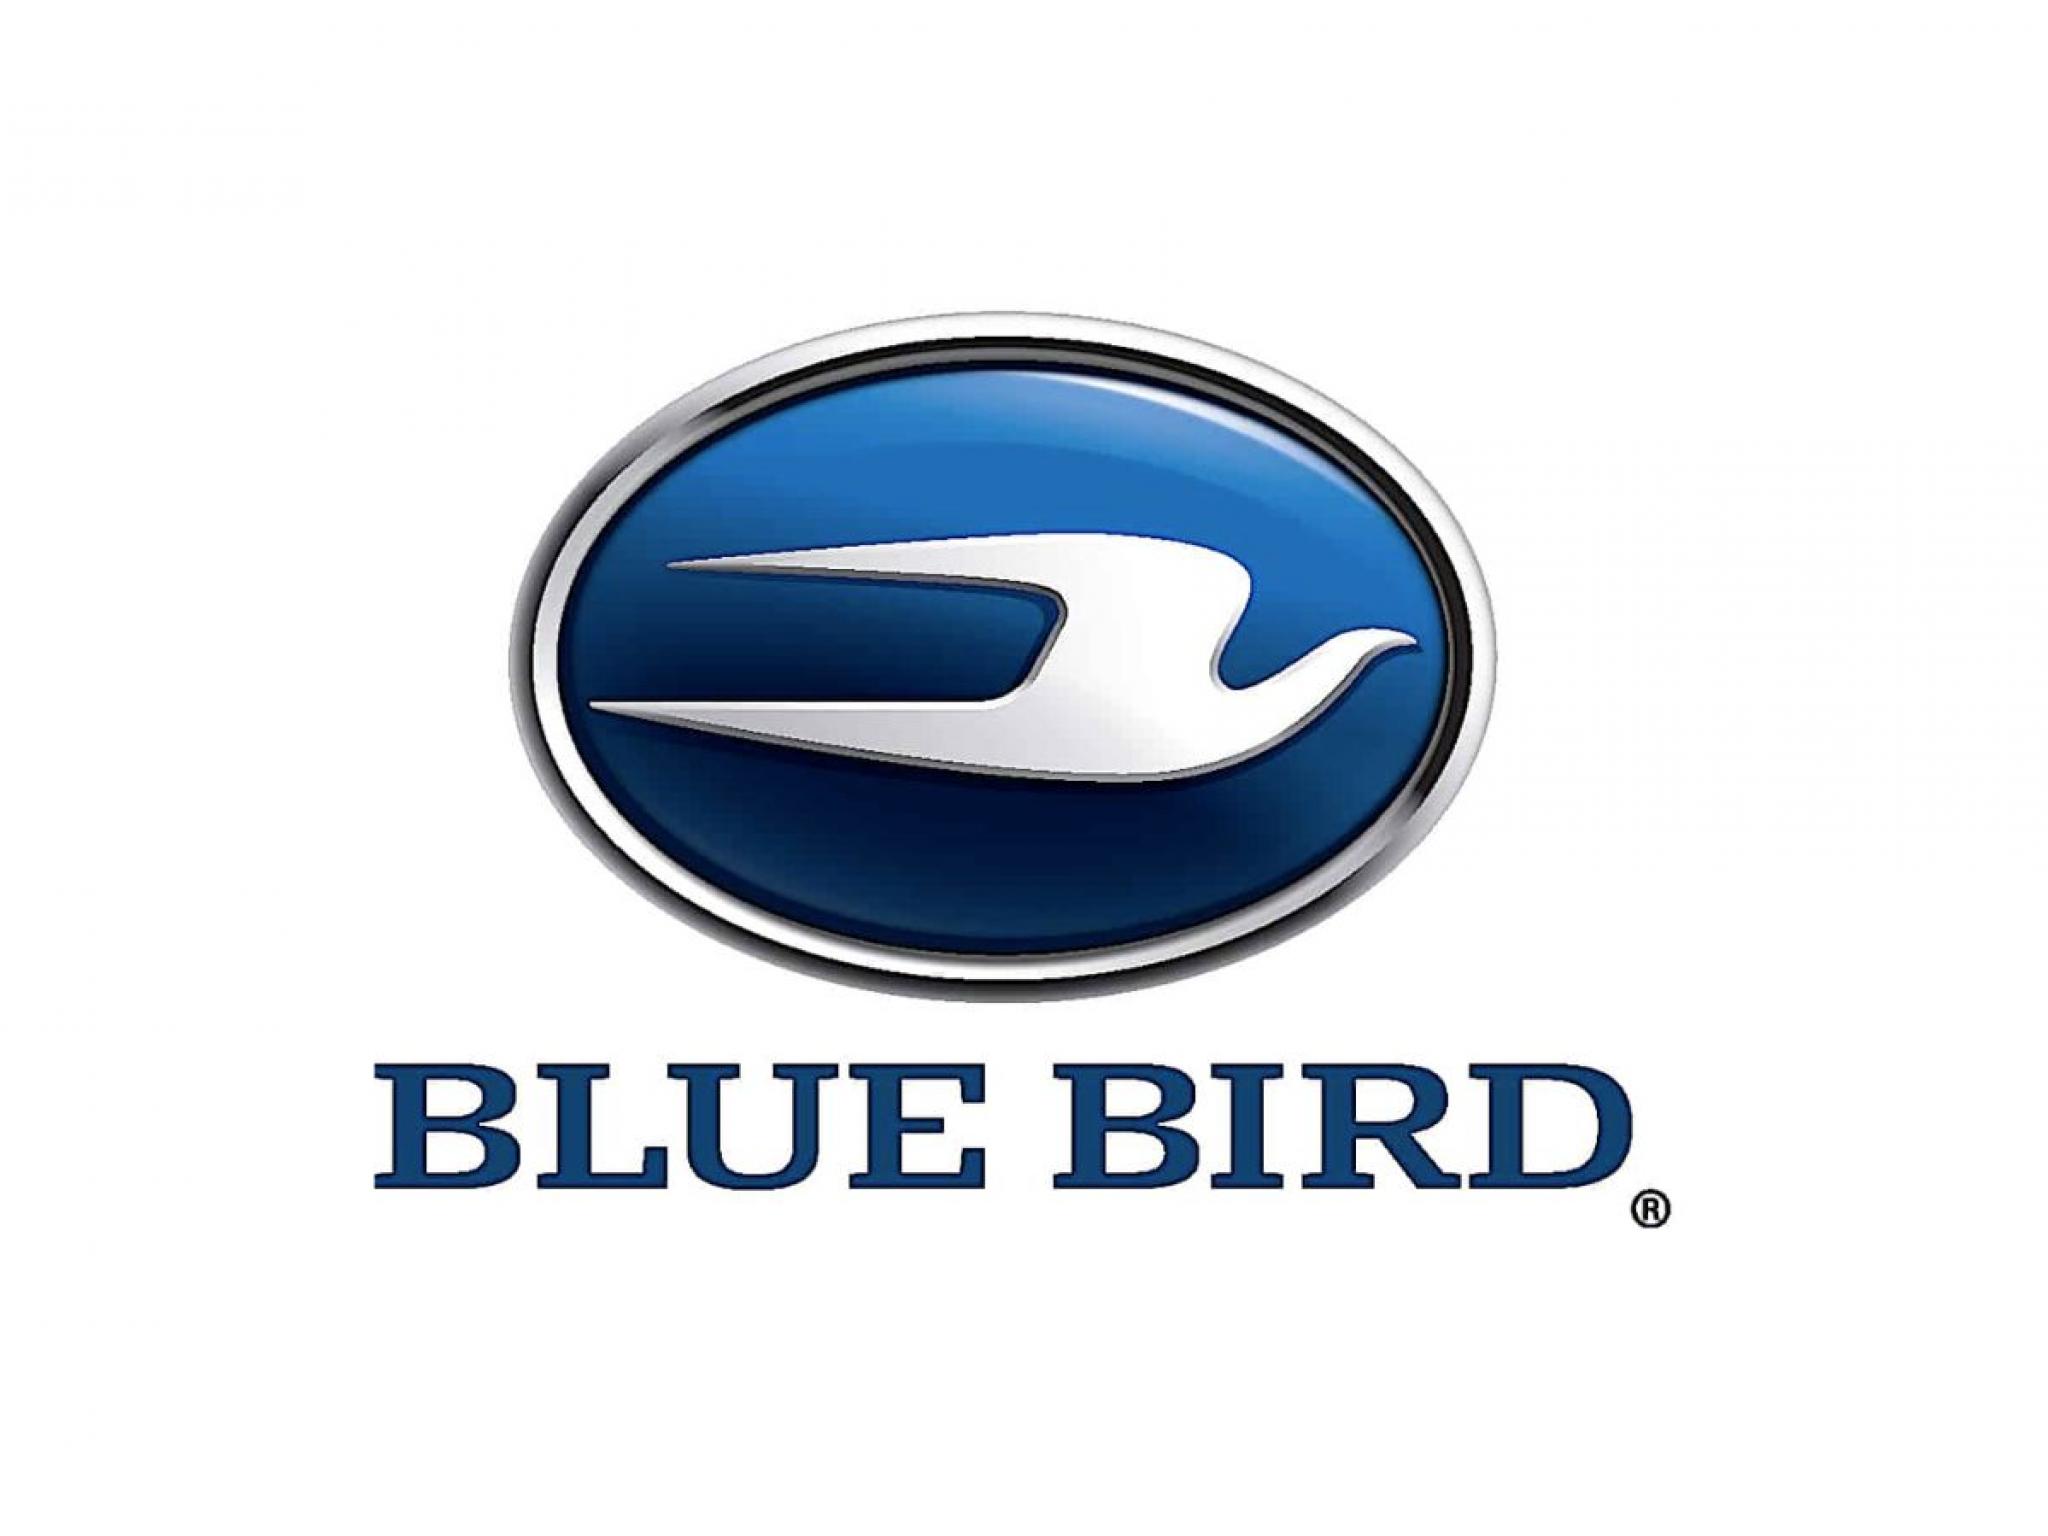  blue-bird-posts-upbeat-results-joins-oil-dri-corporation-of-america-eagle-bulk-shipping-and-other-big-stocks-moving-higher-on-tuesday 